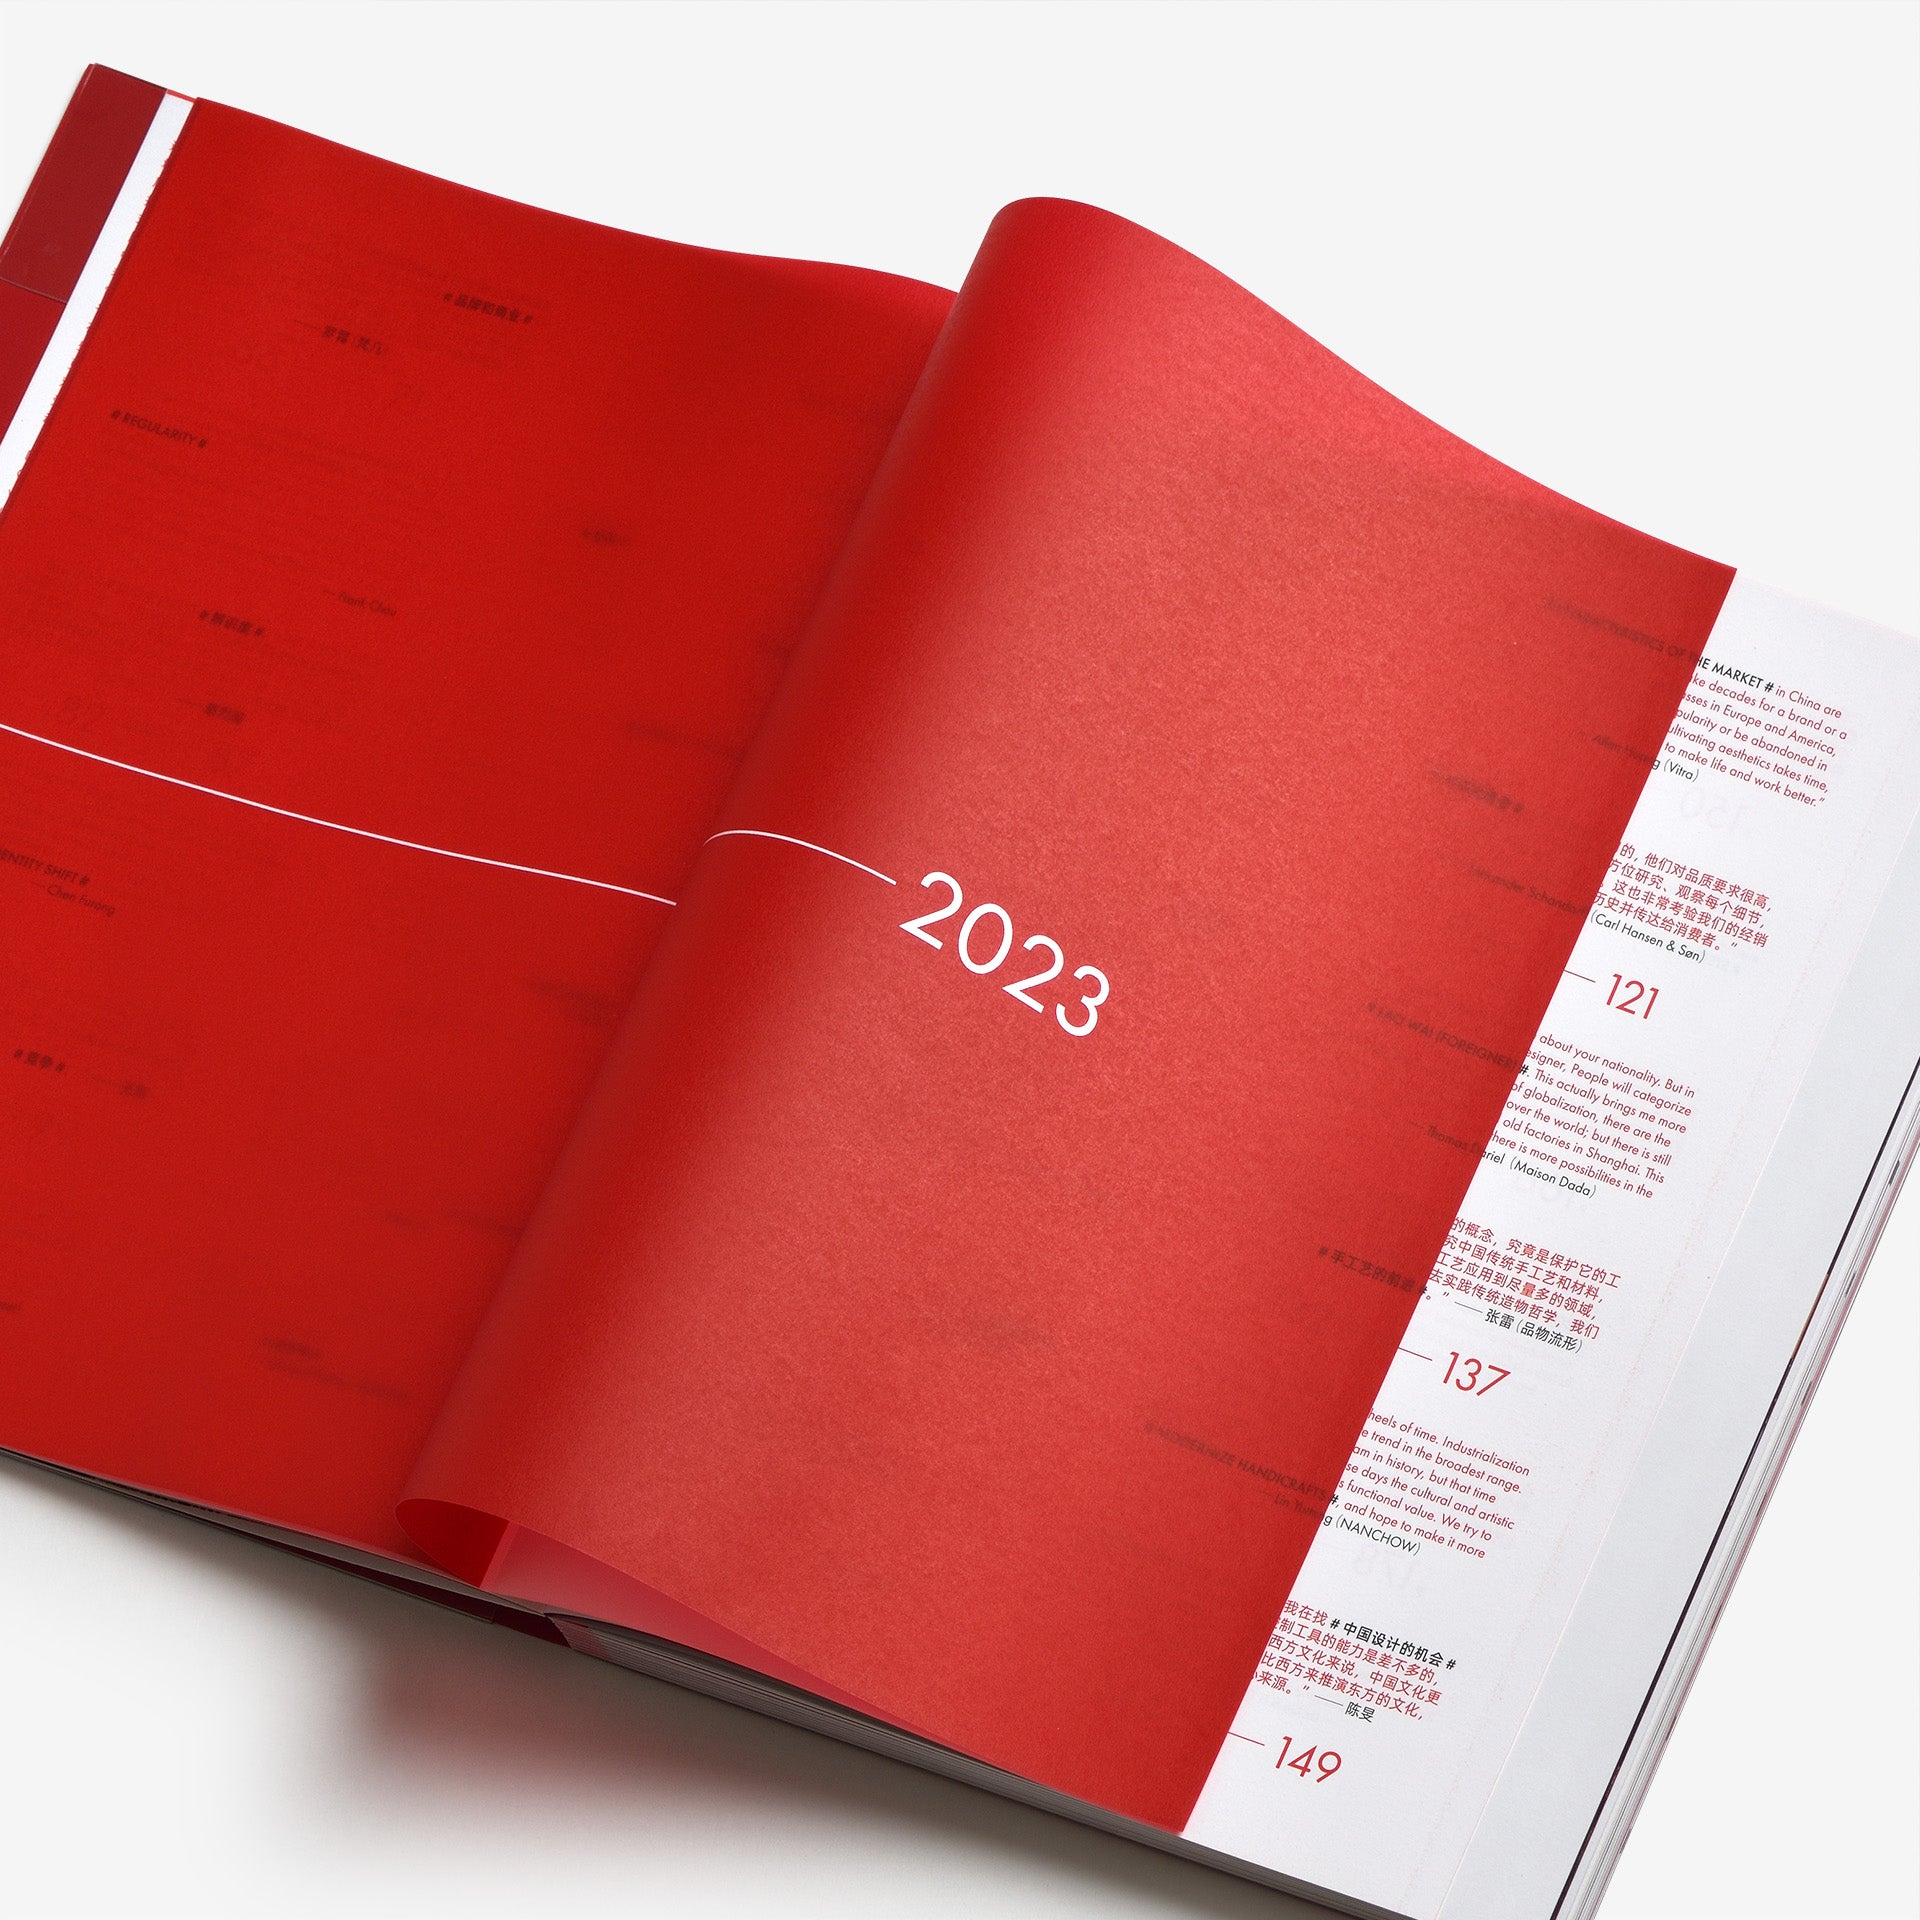 Ten Years: 2014-2023 The Ongoing Progress of Design in China